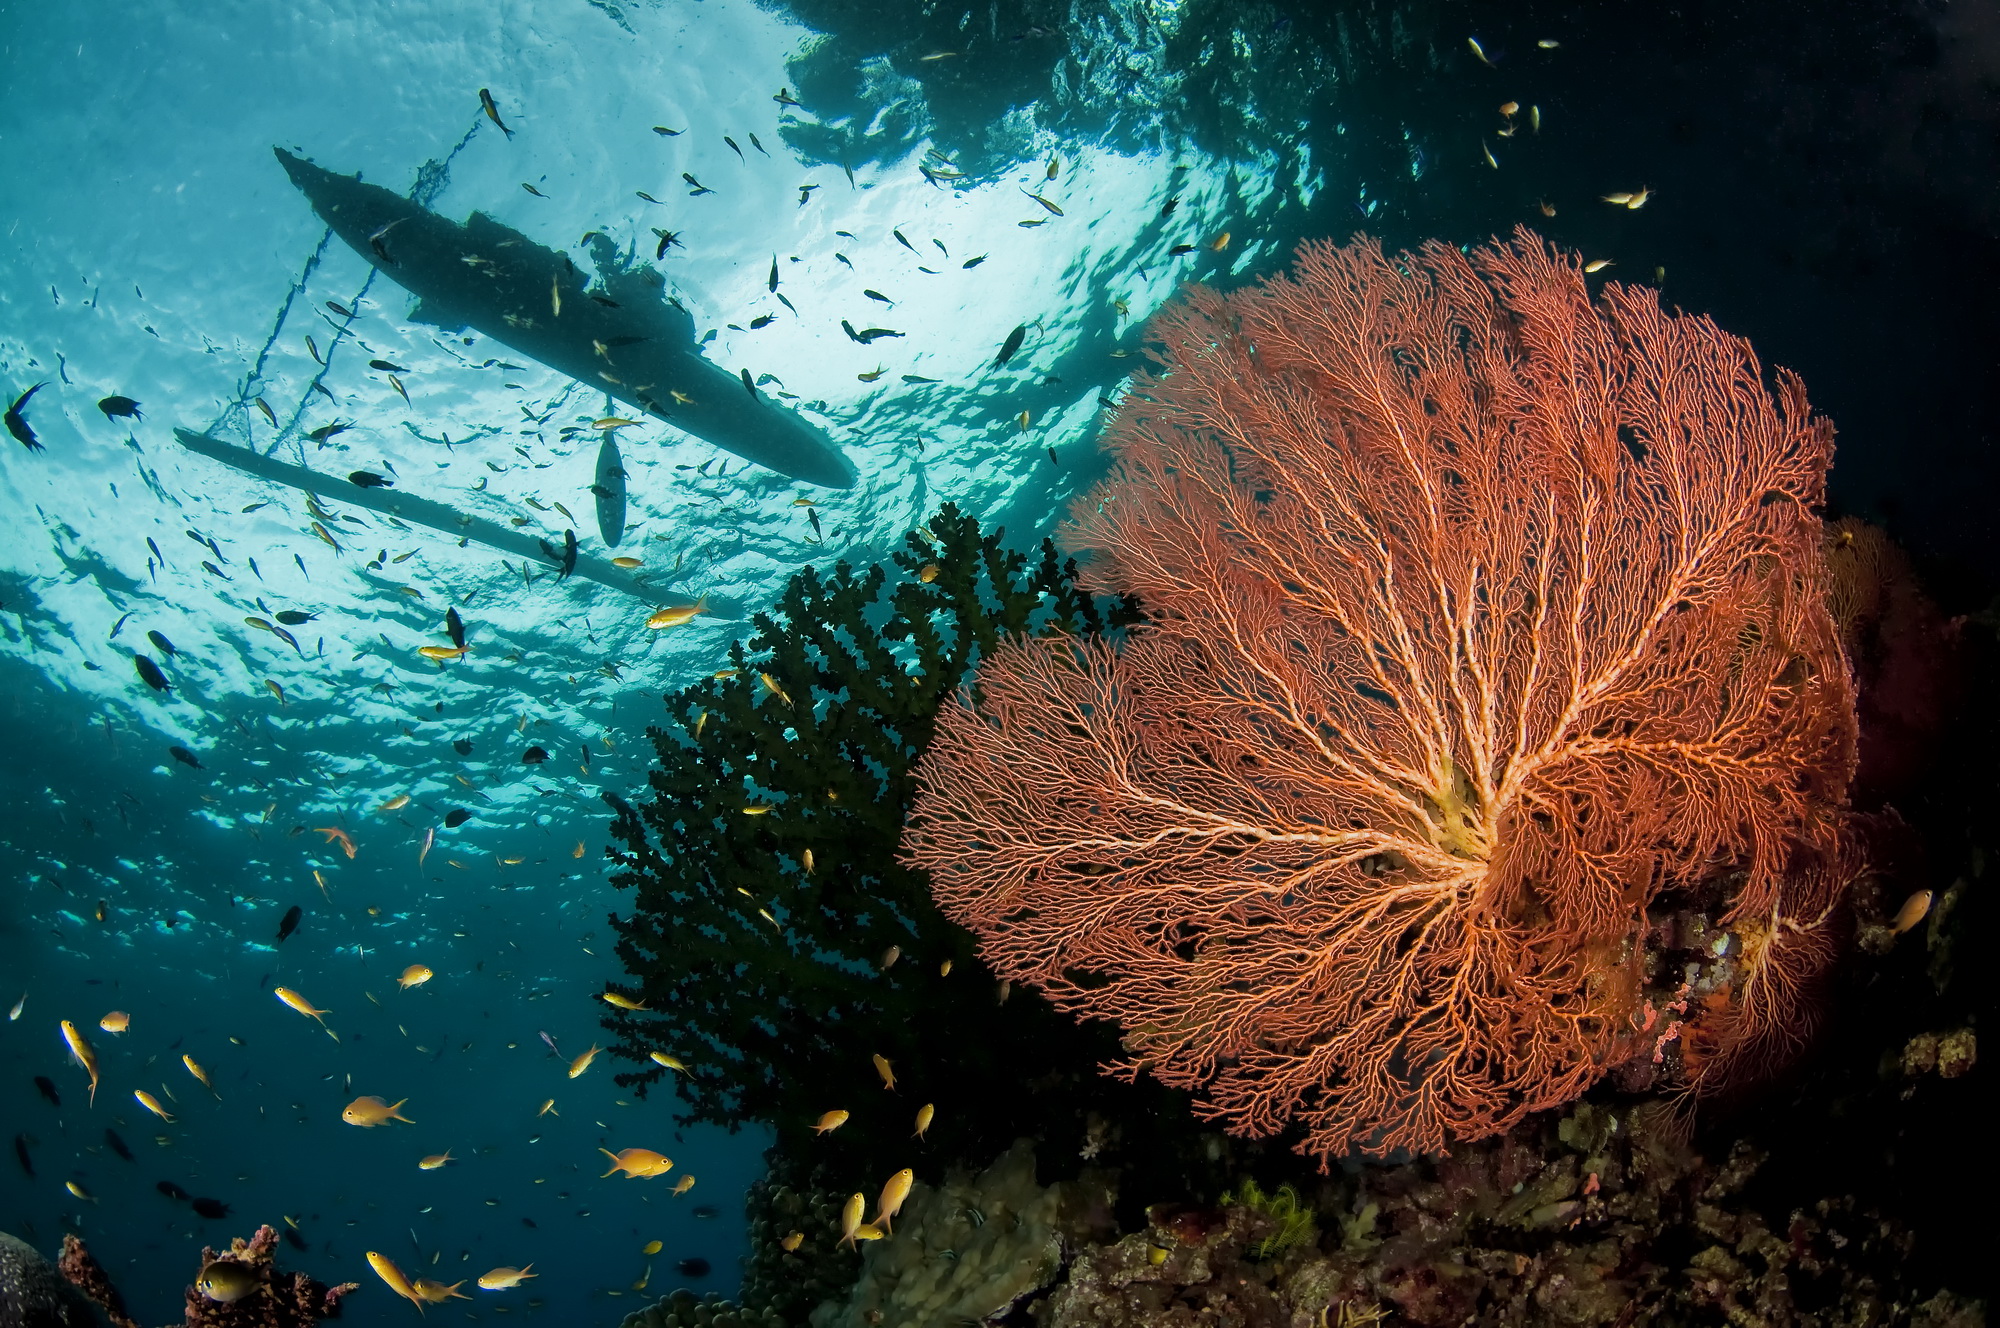 Deacons Reef, Papua New Guinea. Photo by Don Silcock